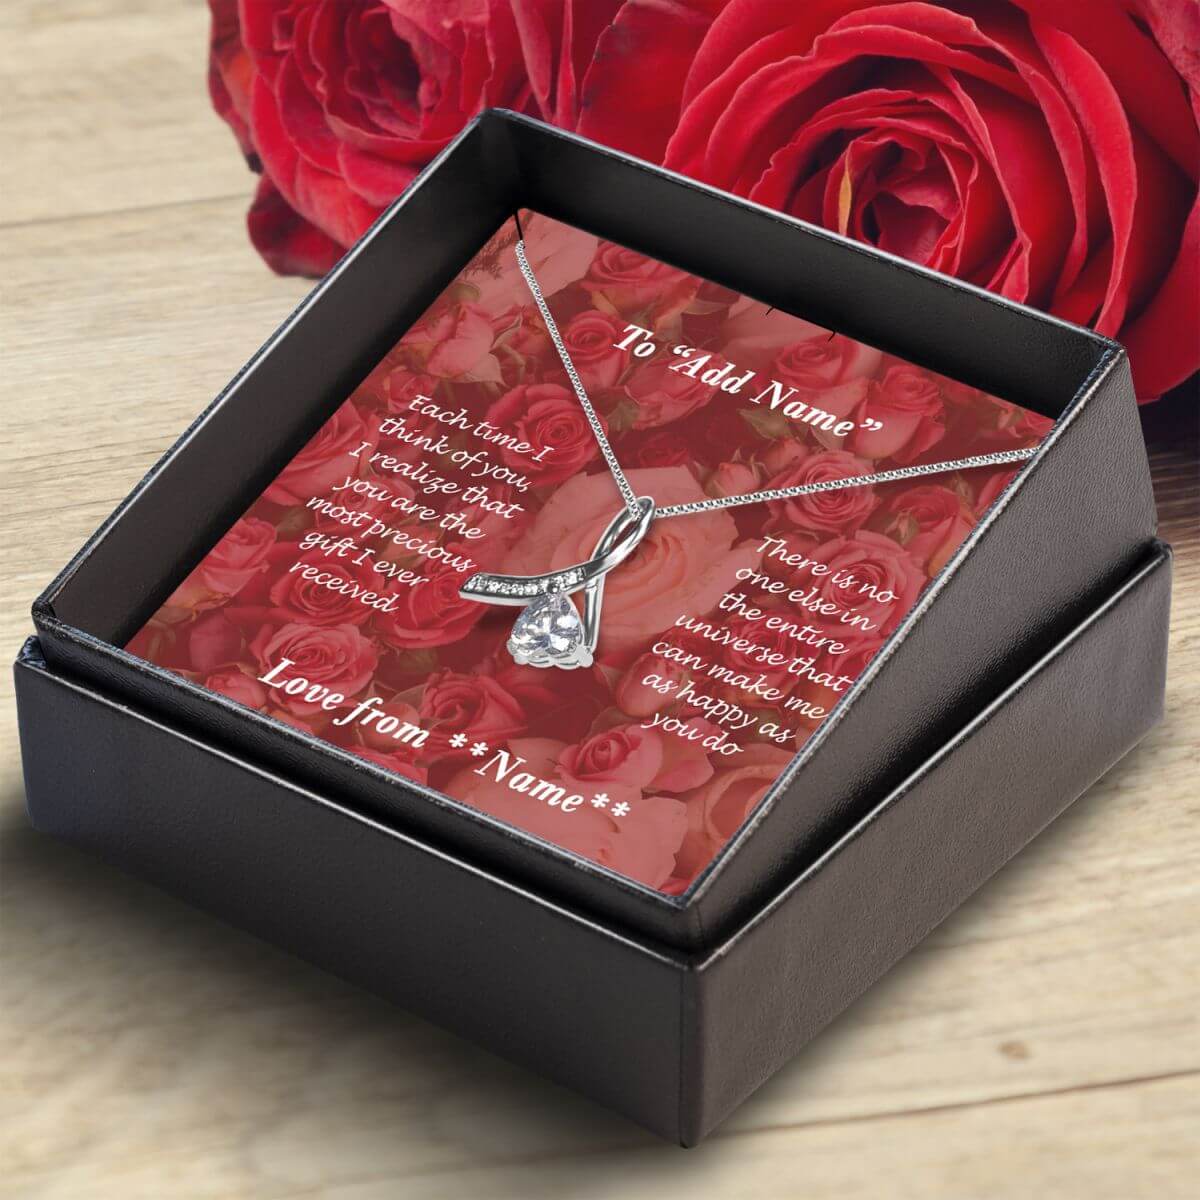 Necklace-Box-angled-Enchanting-Ribbon-Flowers-personalised-BIG-ON-Jewellery-BIG-ON-Necklaces